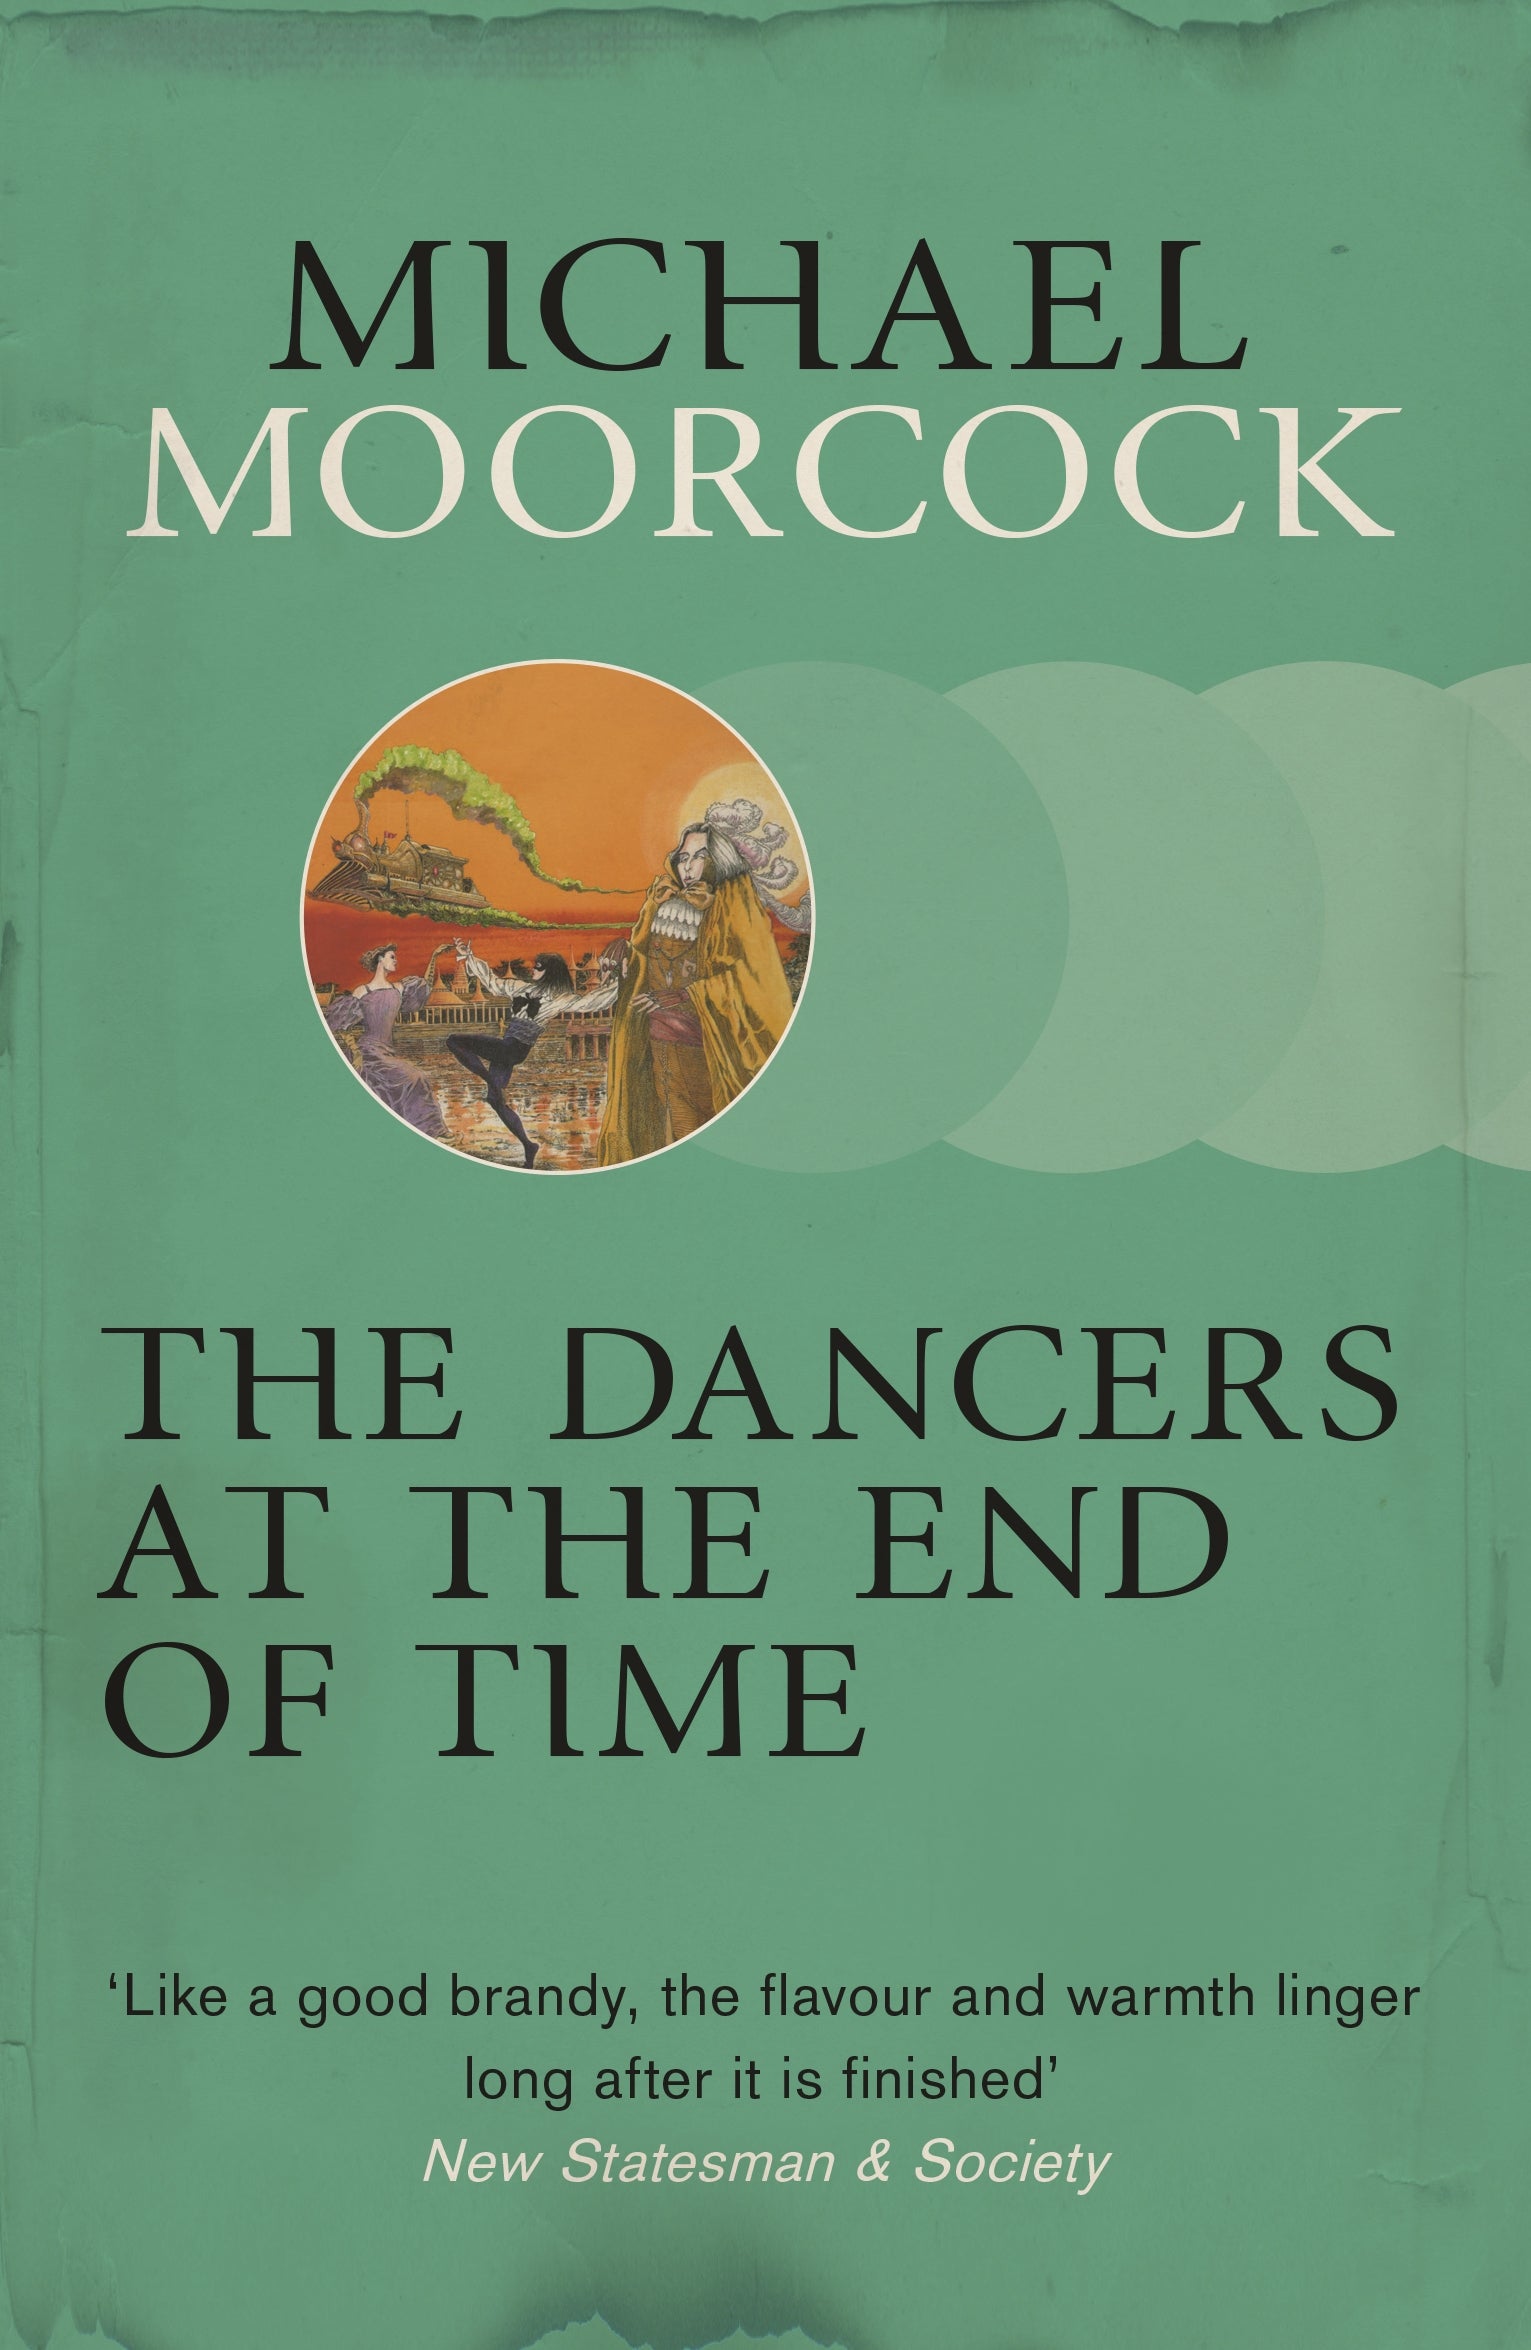 The Dancers at the End of Time by Michael Moorcock